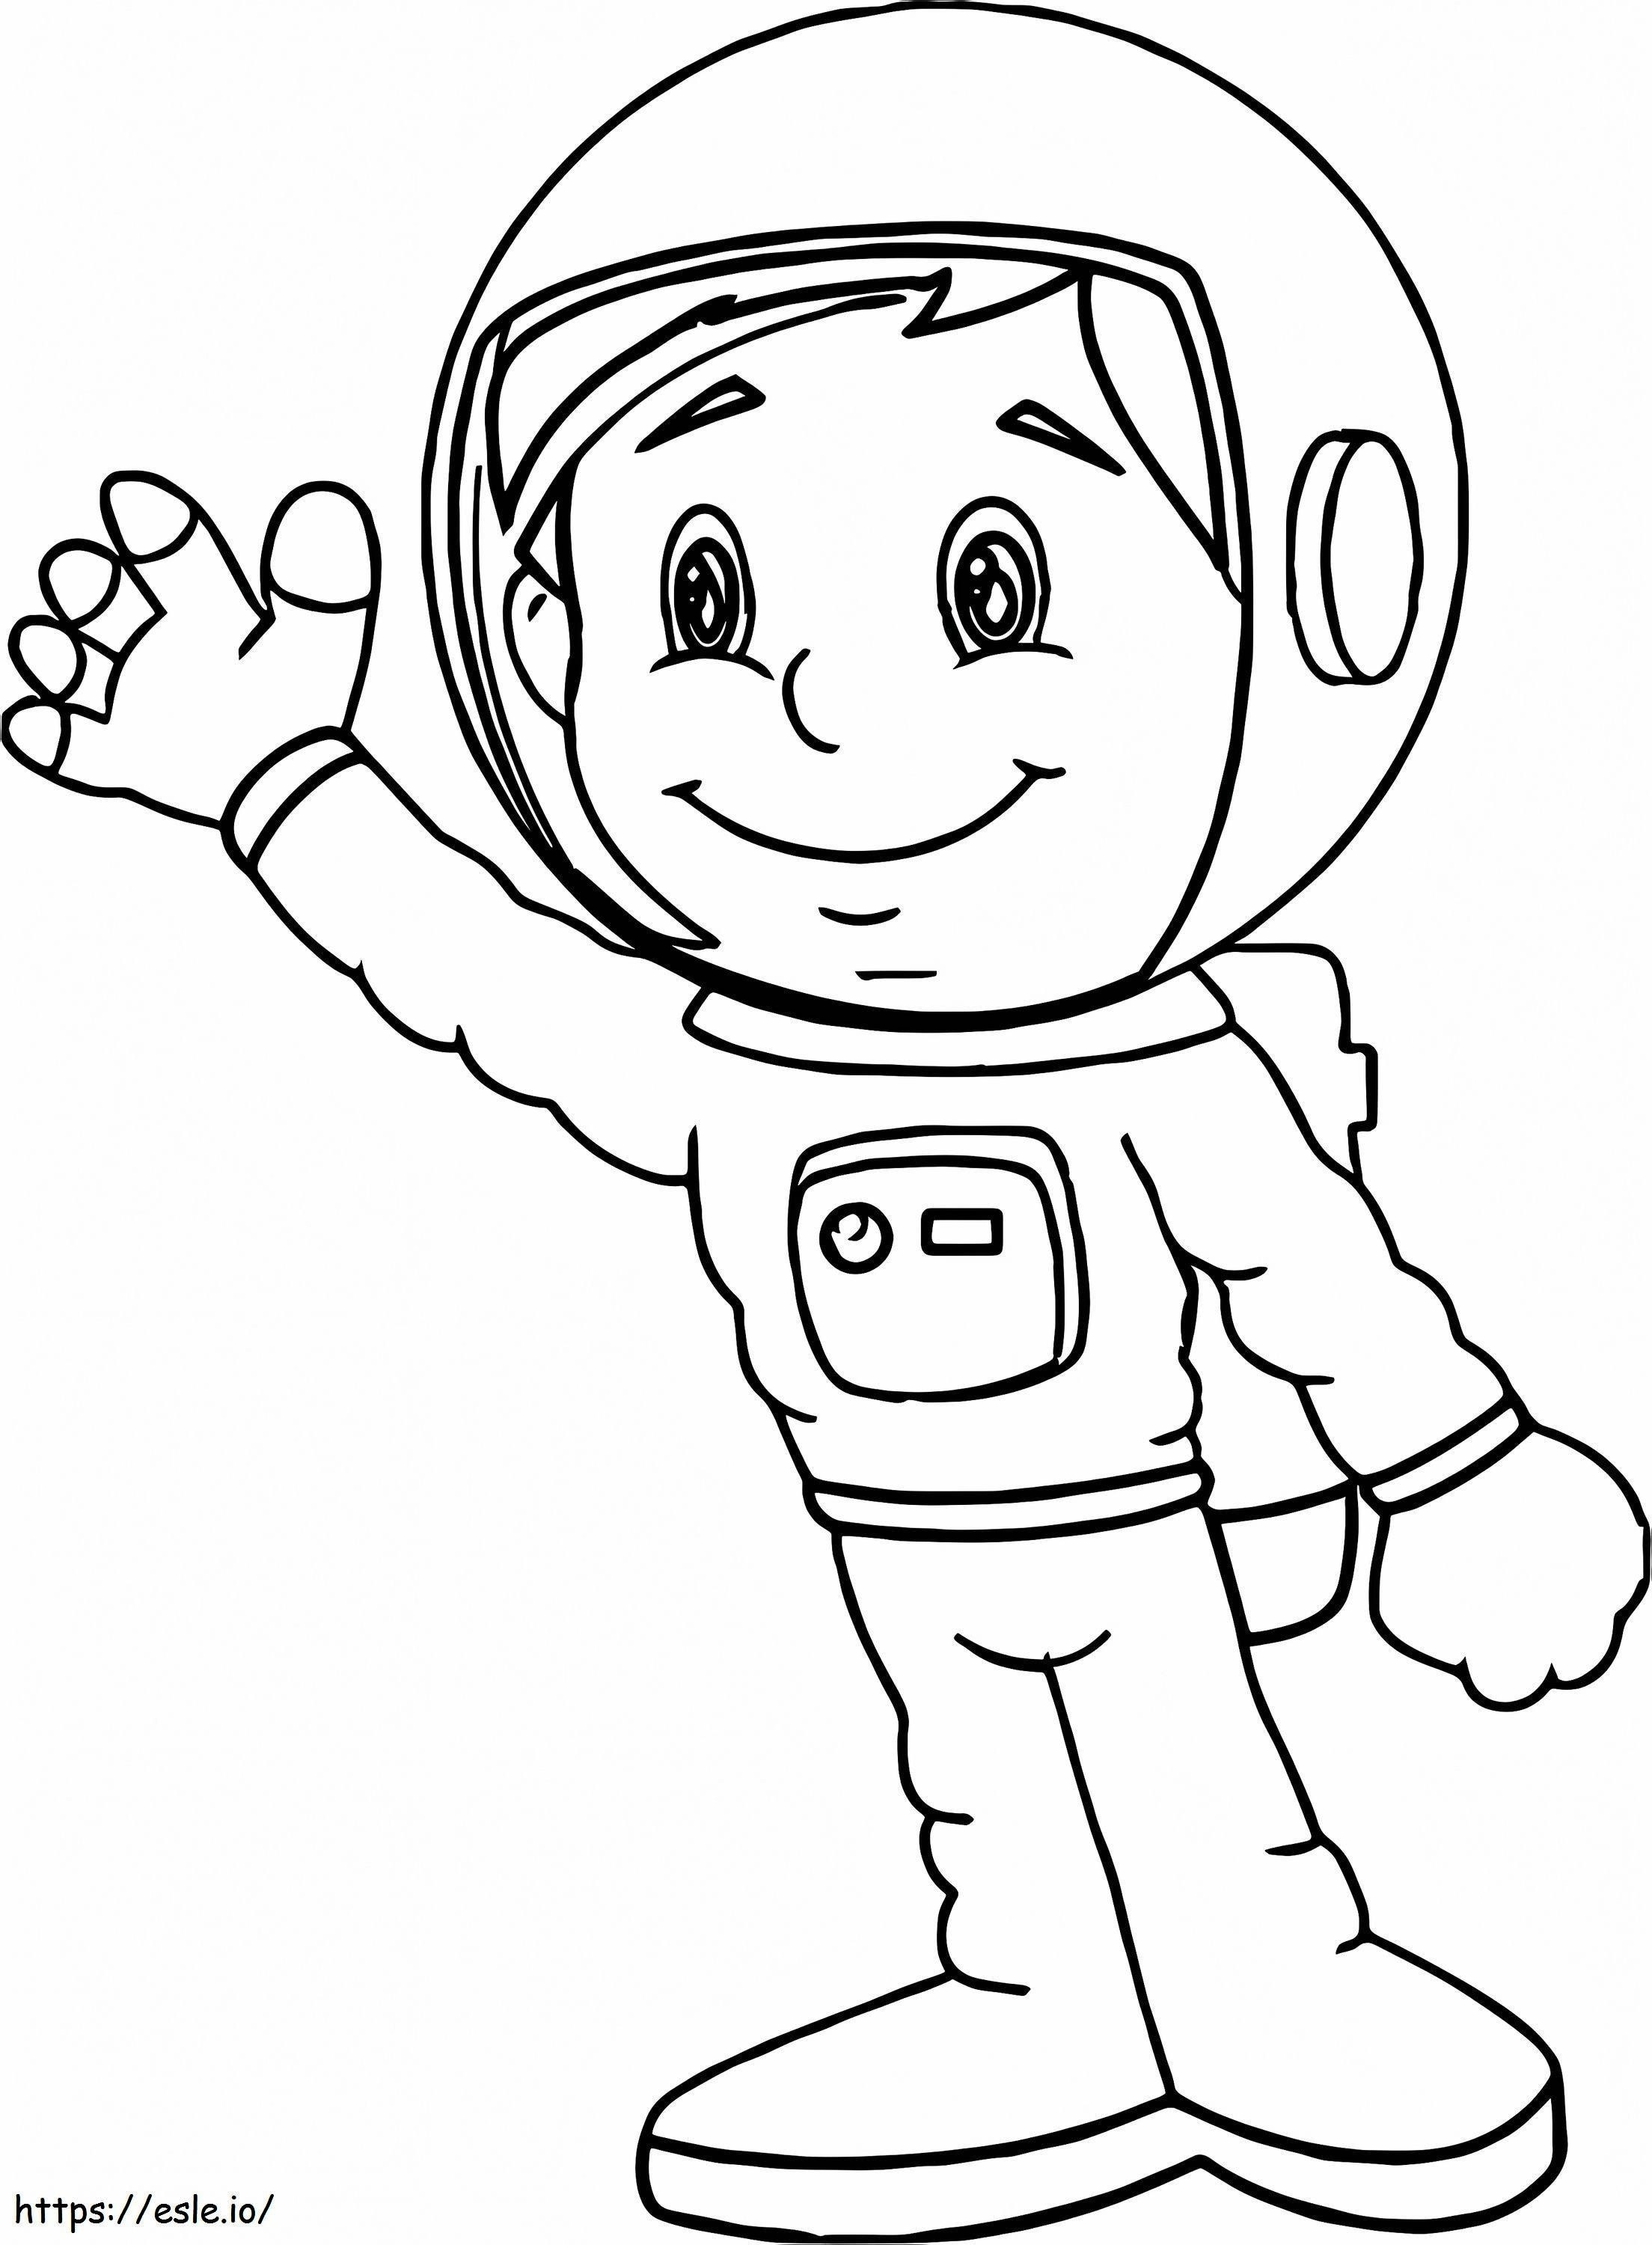 1545723953 Astronaut Printable Free Coloring Sheets Astronaut coloring page